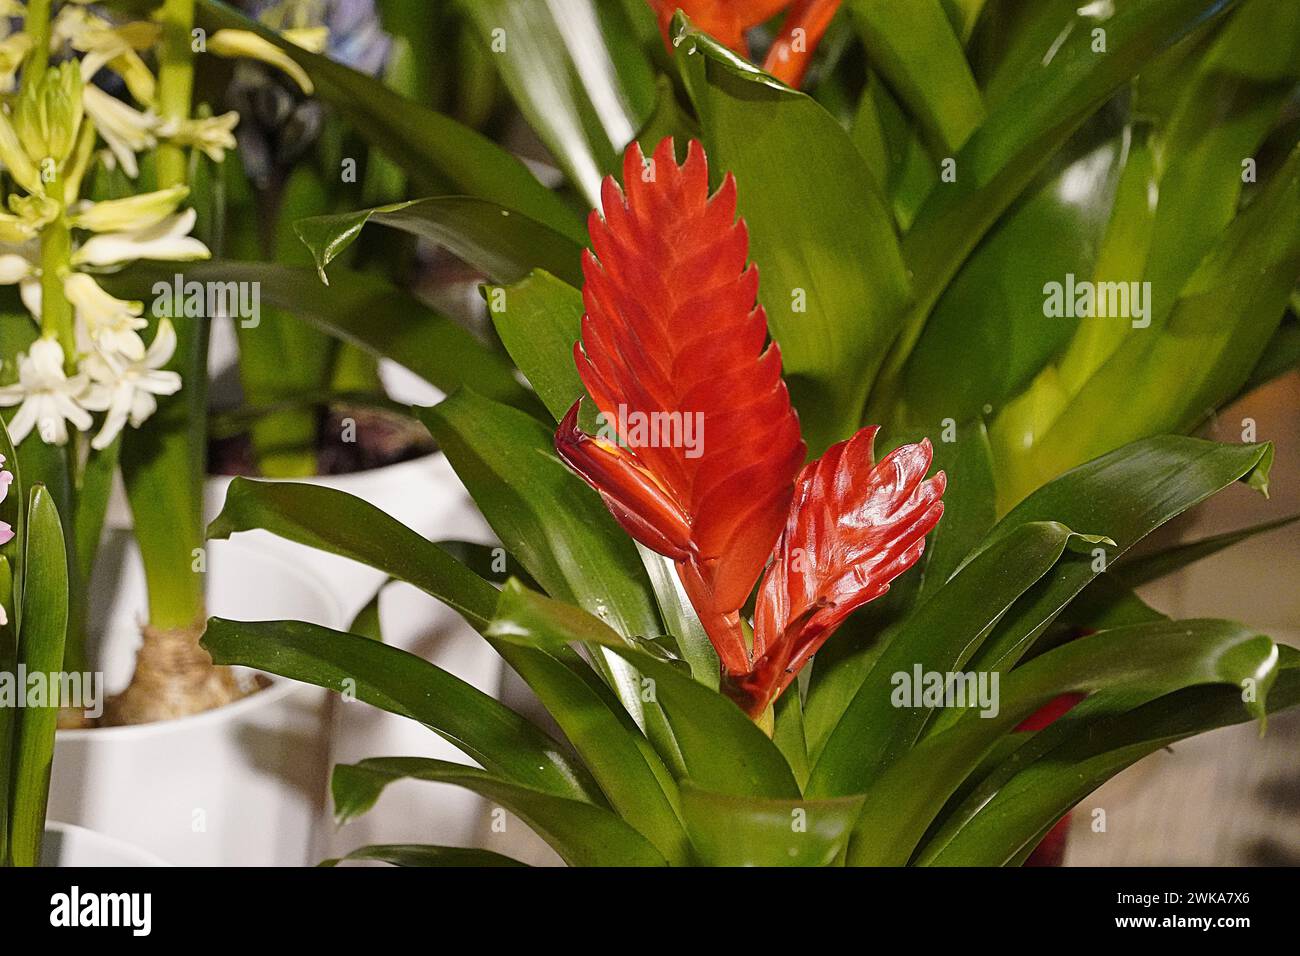 Flaming sword, or Vriesea carinata in a flower shop Stock Photo